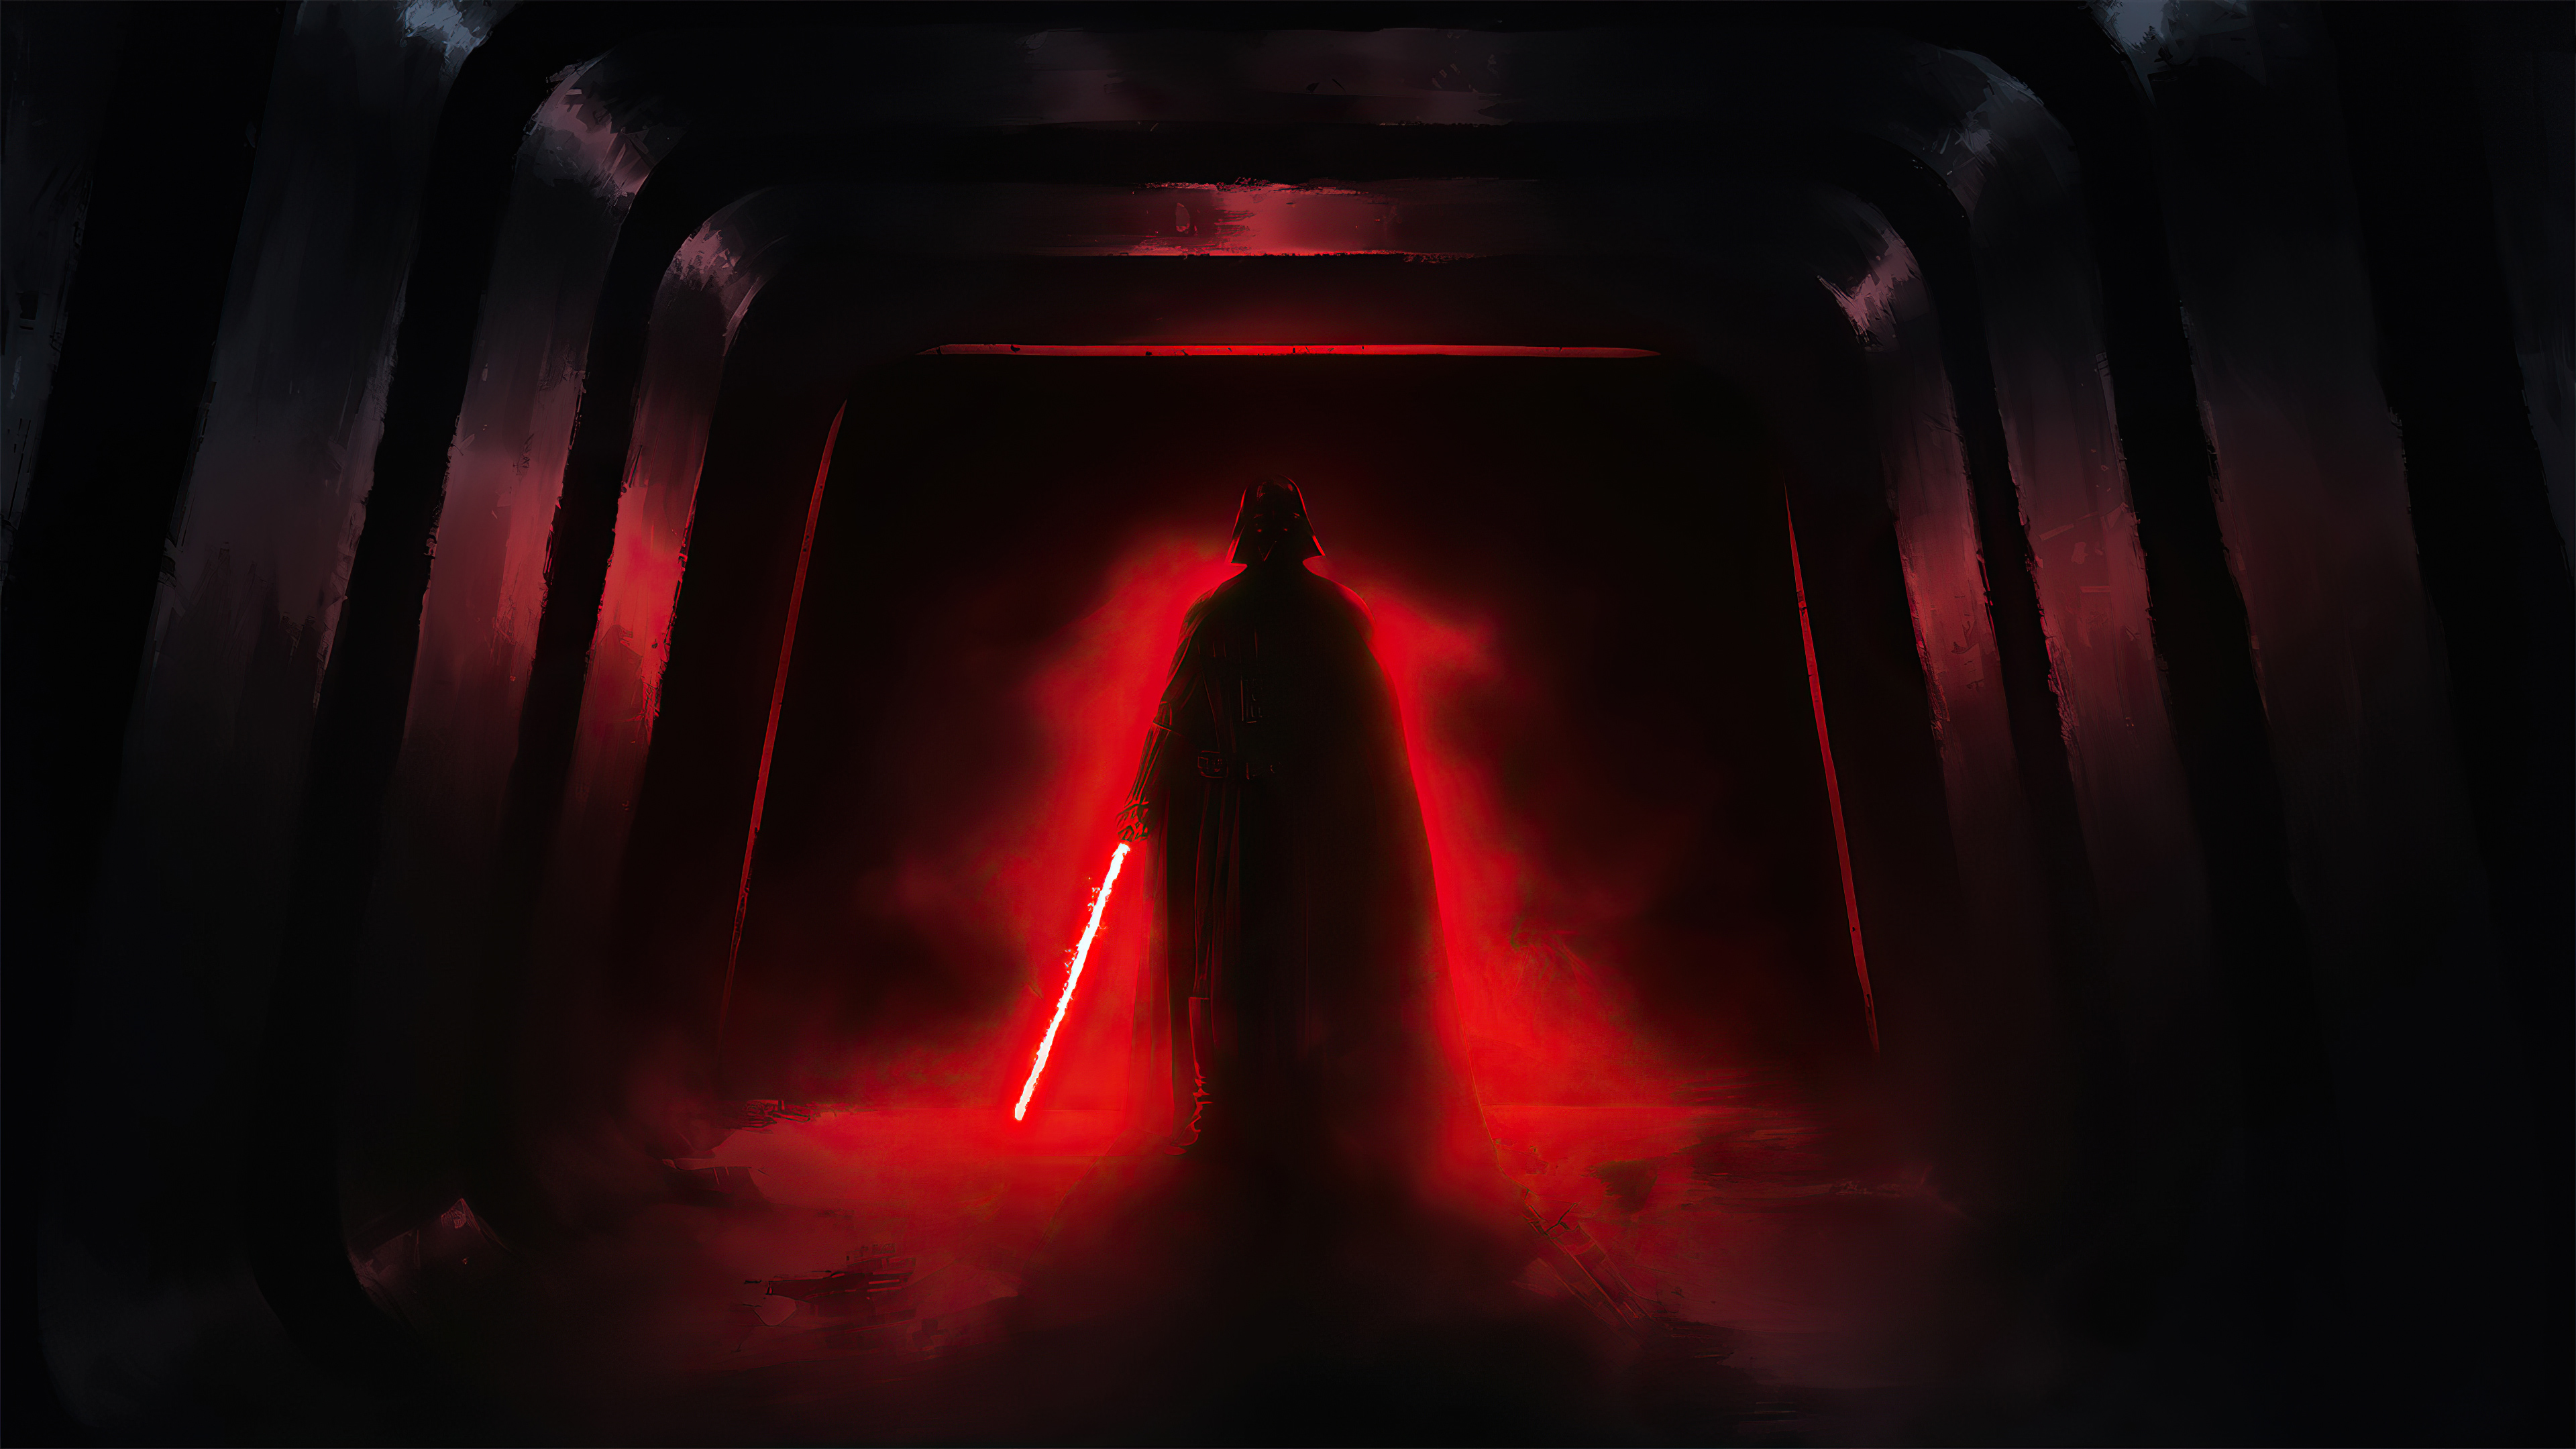 4K Star Wars Sith Wallpapers